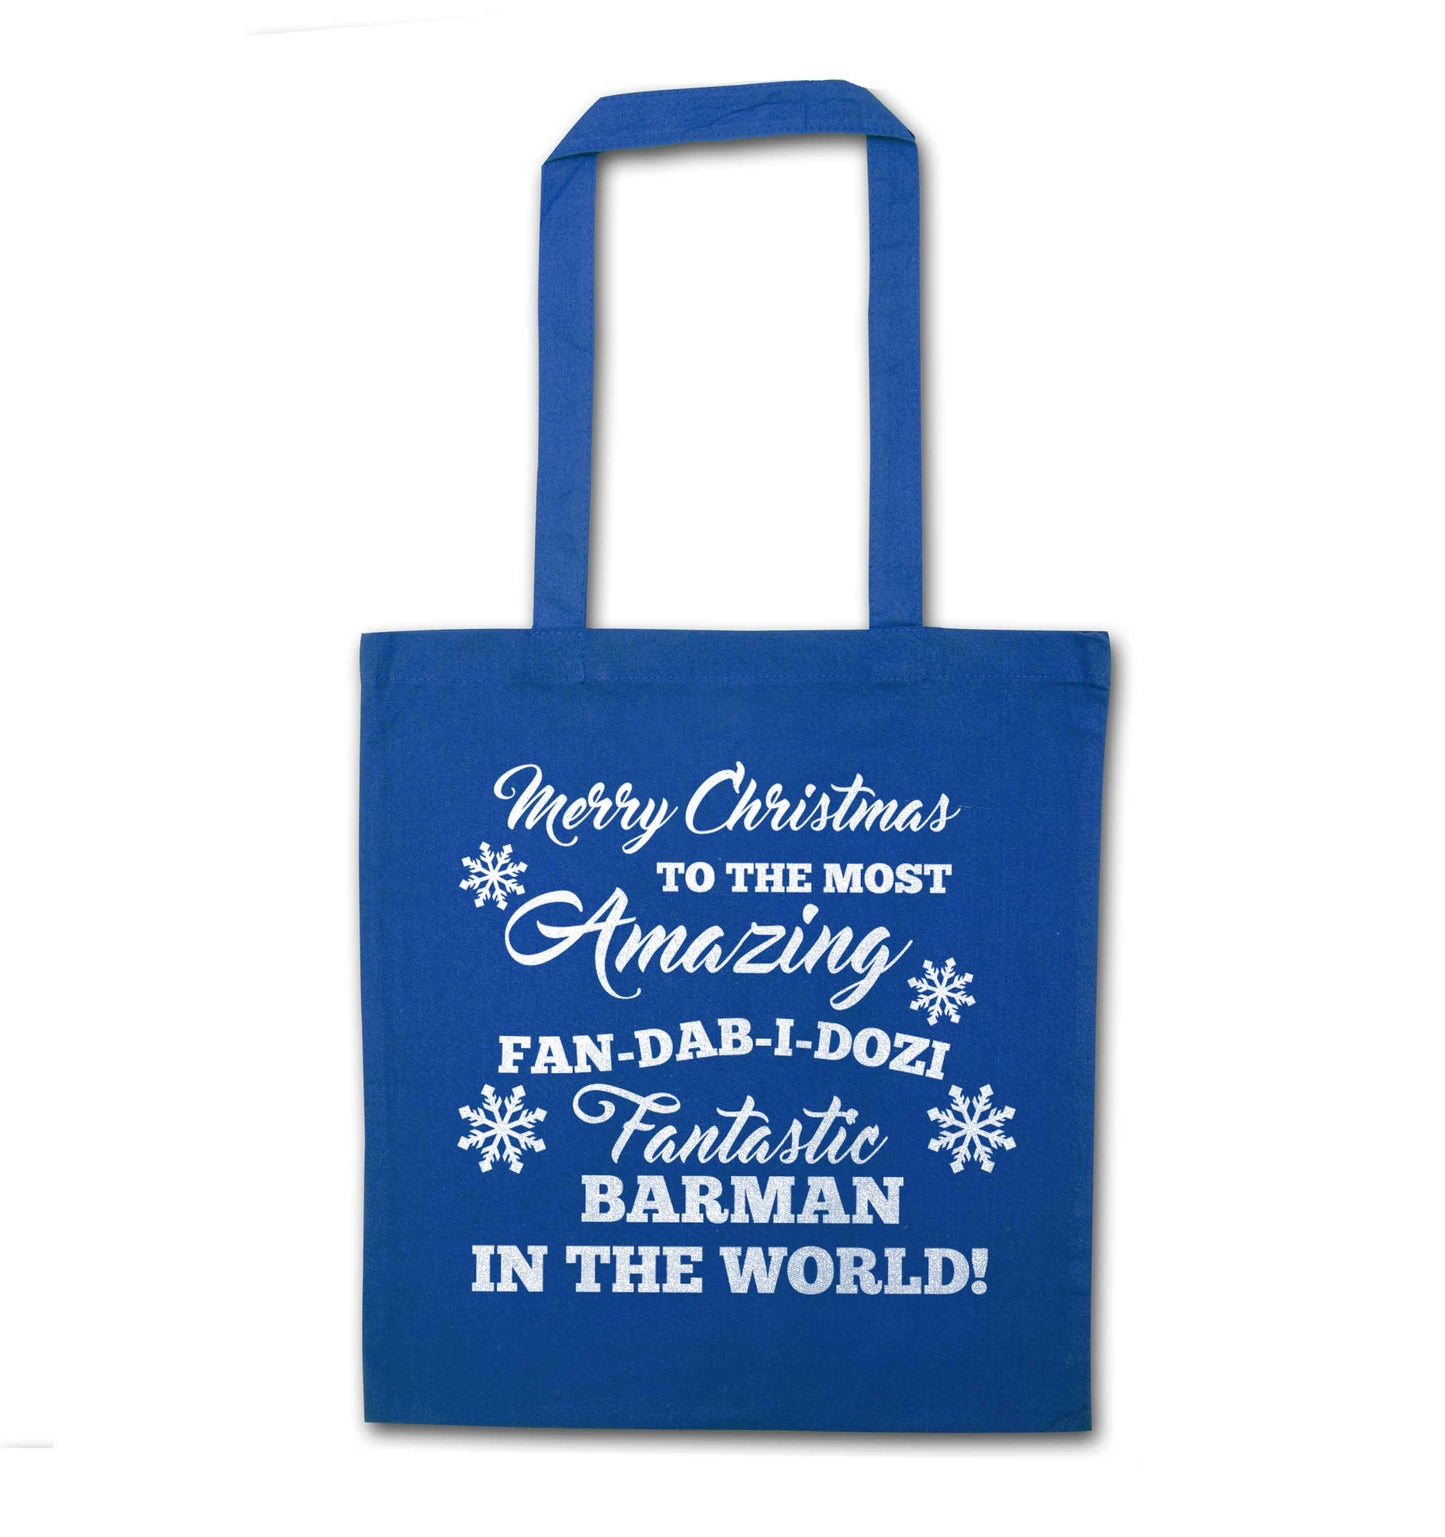 Merry Christmas to the most amazing barman in the world! blue tote bag